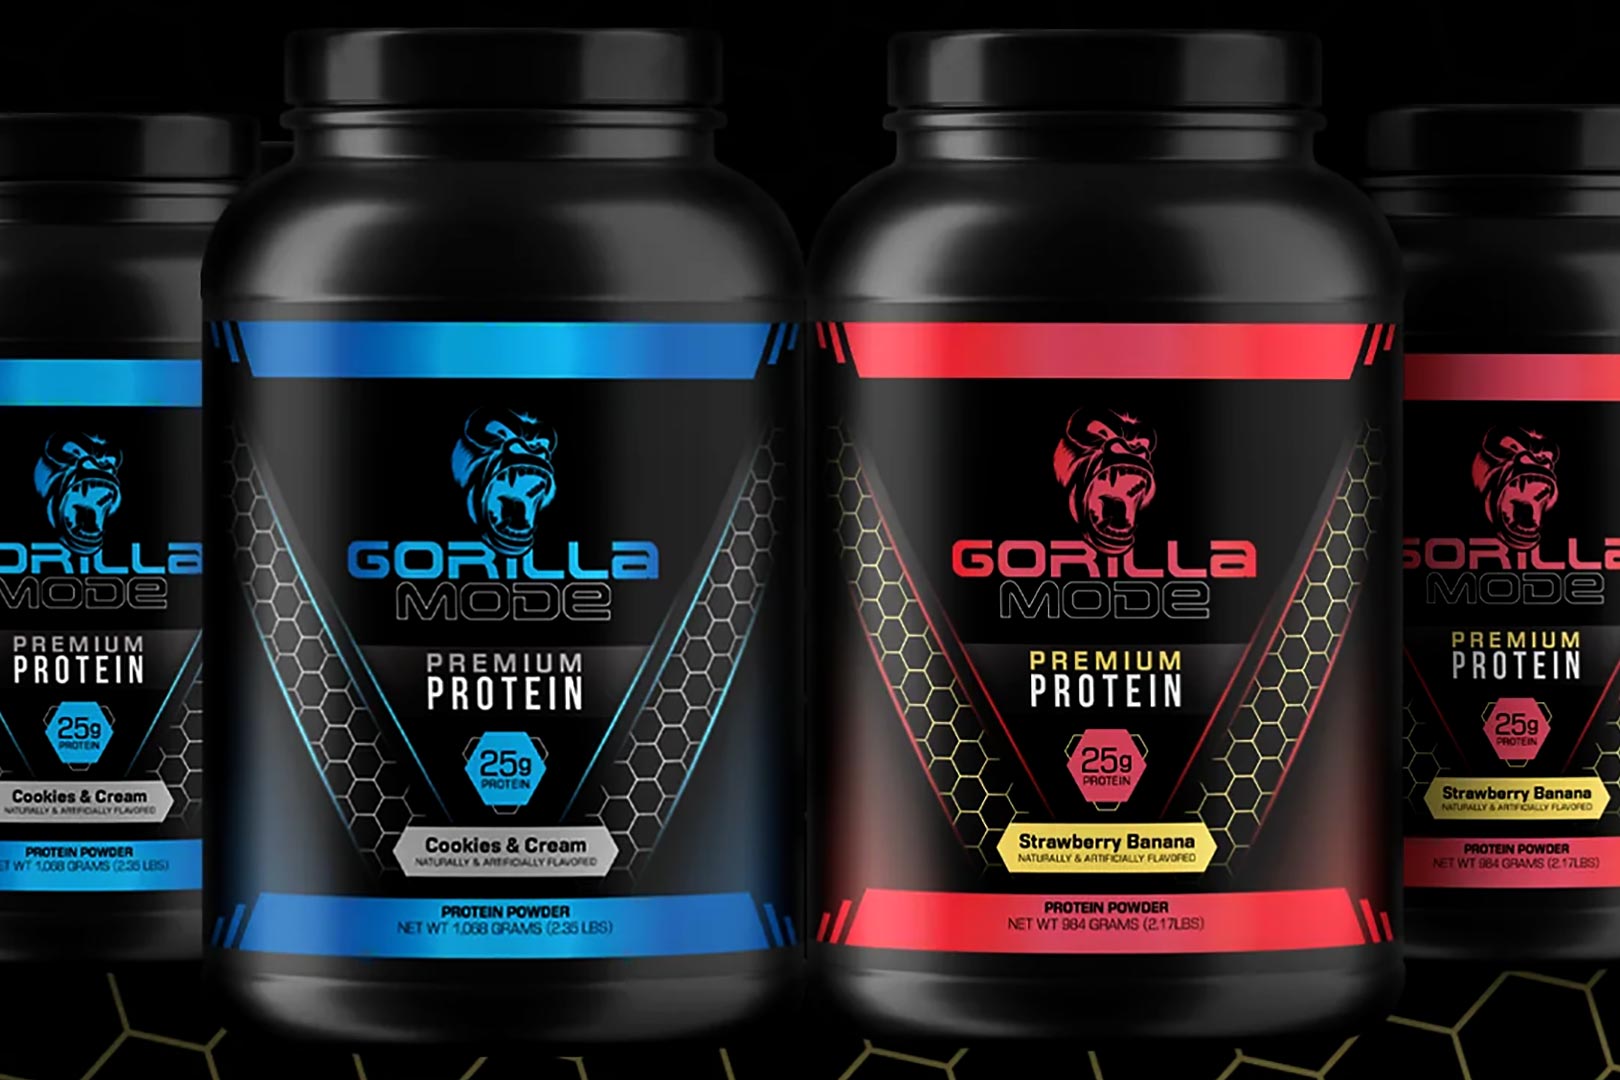 Gorilla Mode Protein now in Strawberry Banana and Cookies